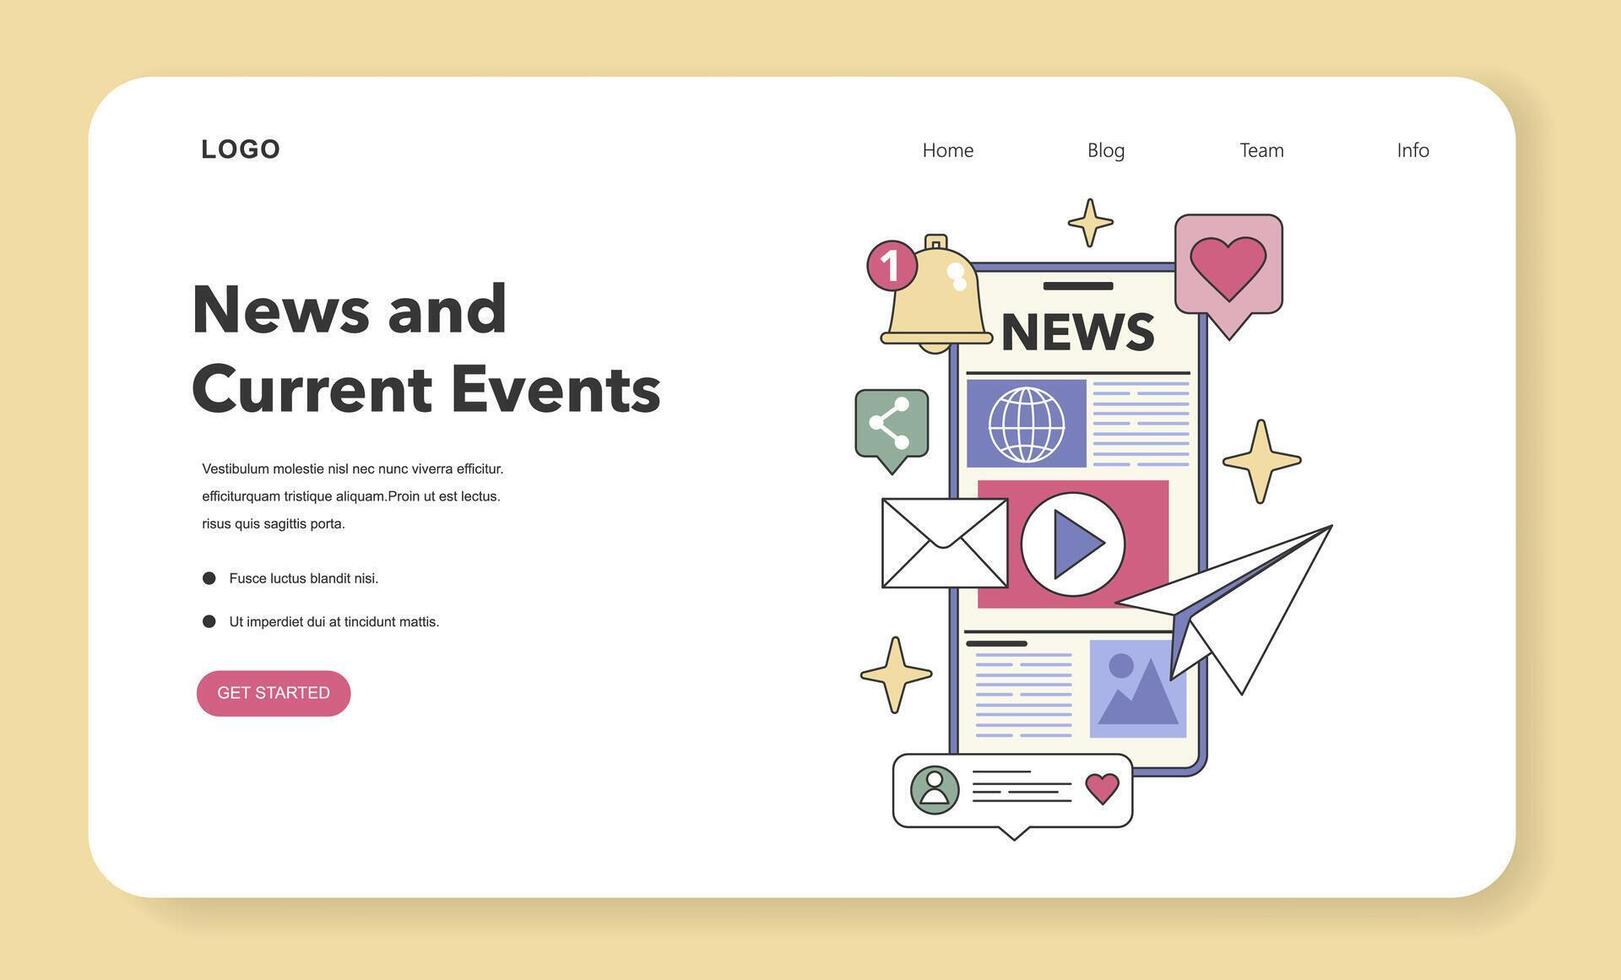 News and Current Events theme. Flat vector illustration